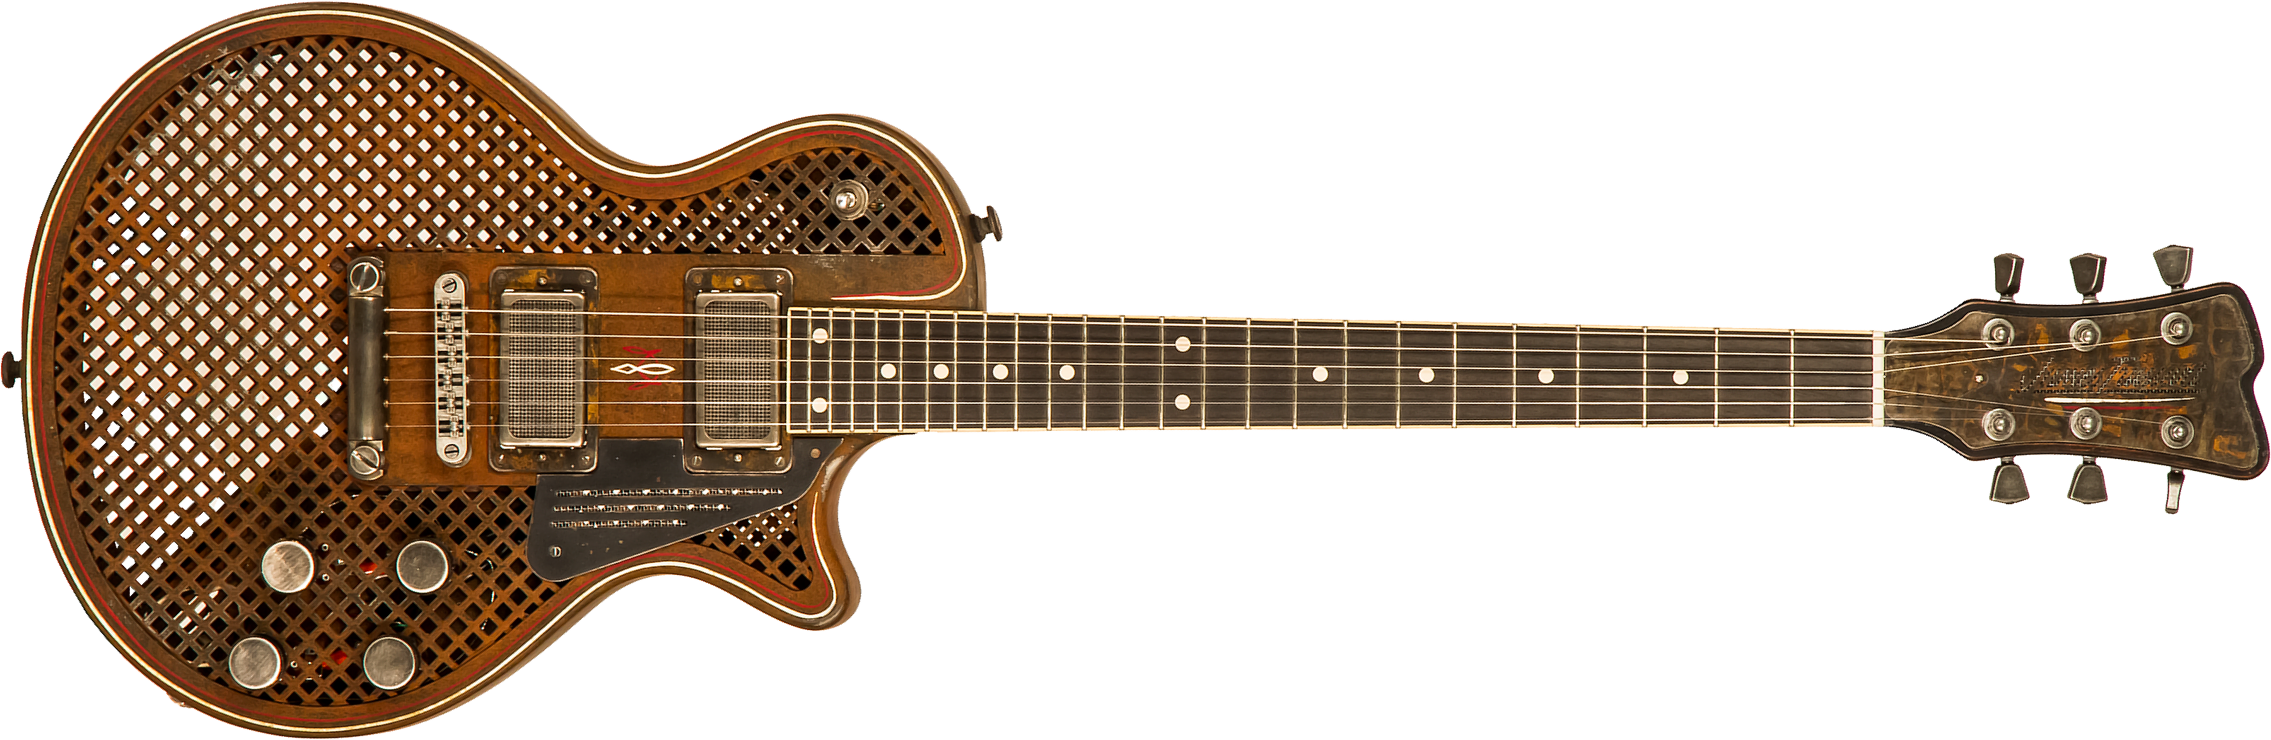 James Trussart Steeldeville Perf.front.back 2h Ht Eb #21179 - Rust O Matic Pinstriped Caged - Guitare Électrique Single Cut - Main picture